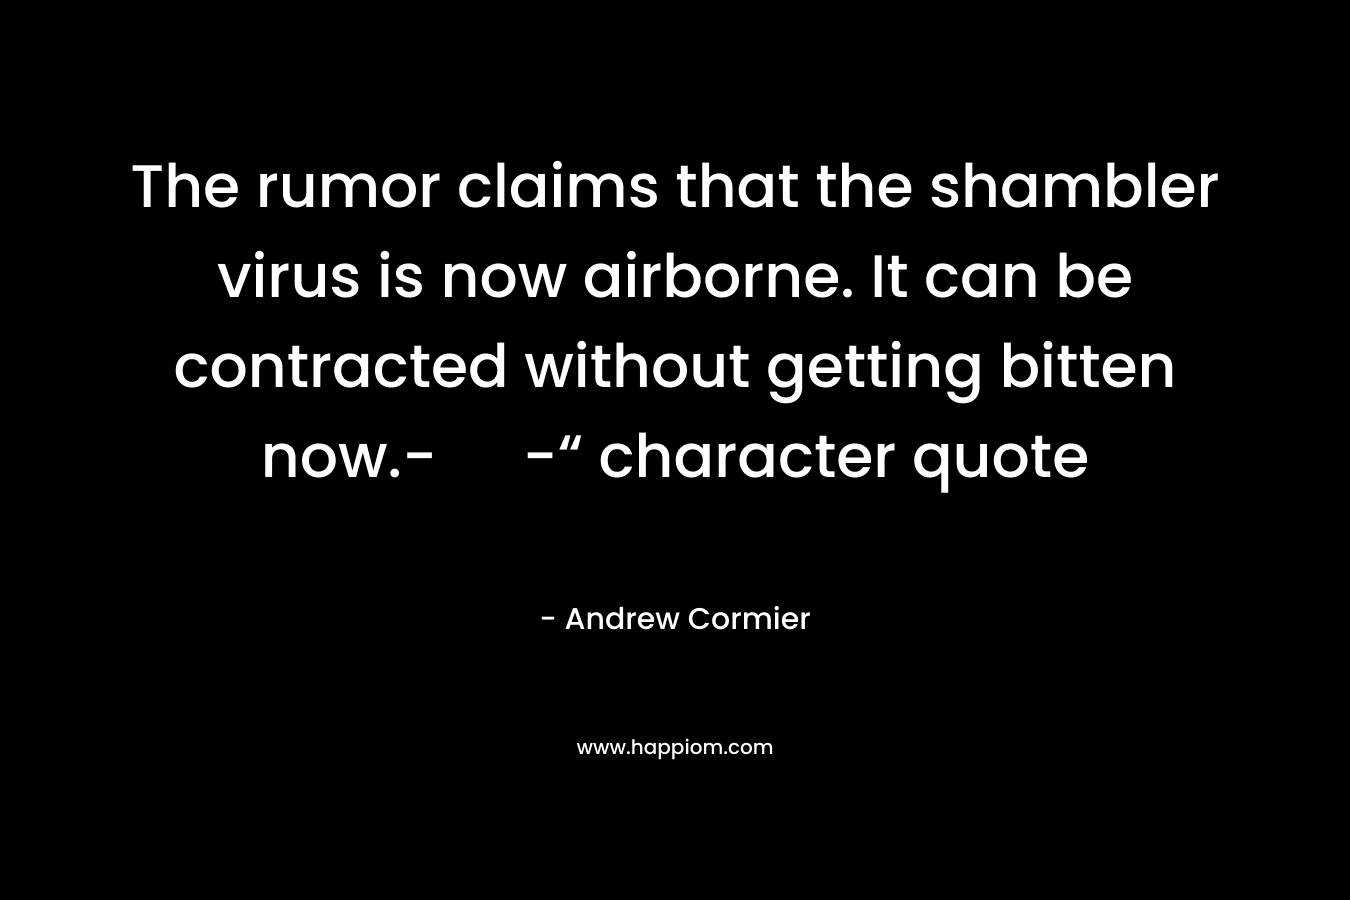 The rumor claims that the shambler virus is now airborne. It can be contracted without getting bitten now.- -“ character quote – Andrew Cormier